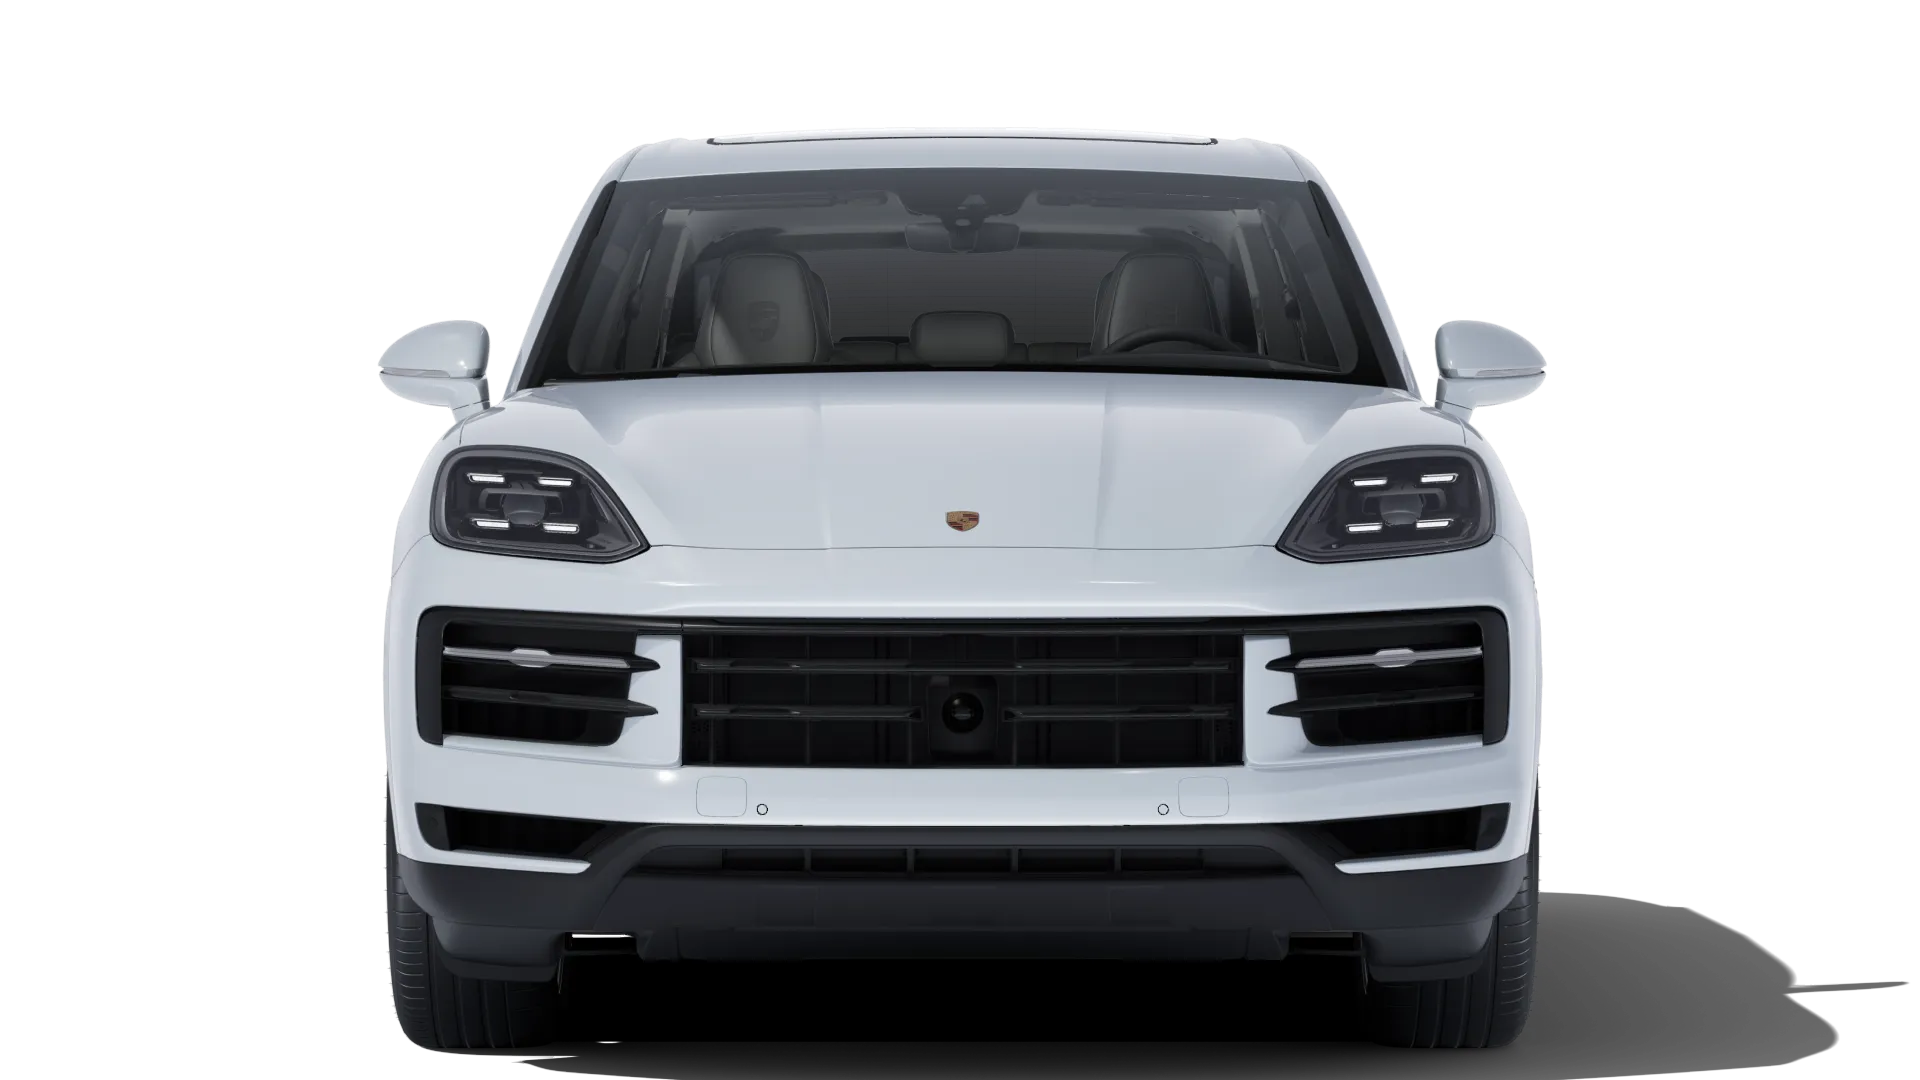 Exterior view of The New Cayenne